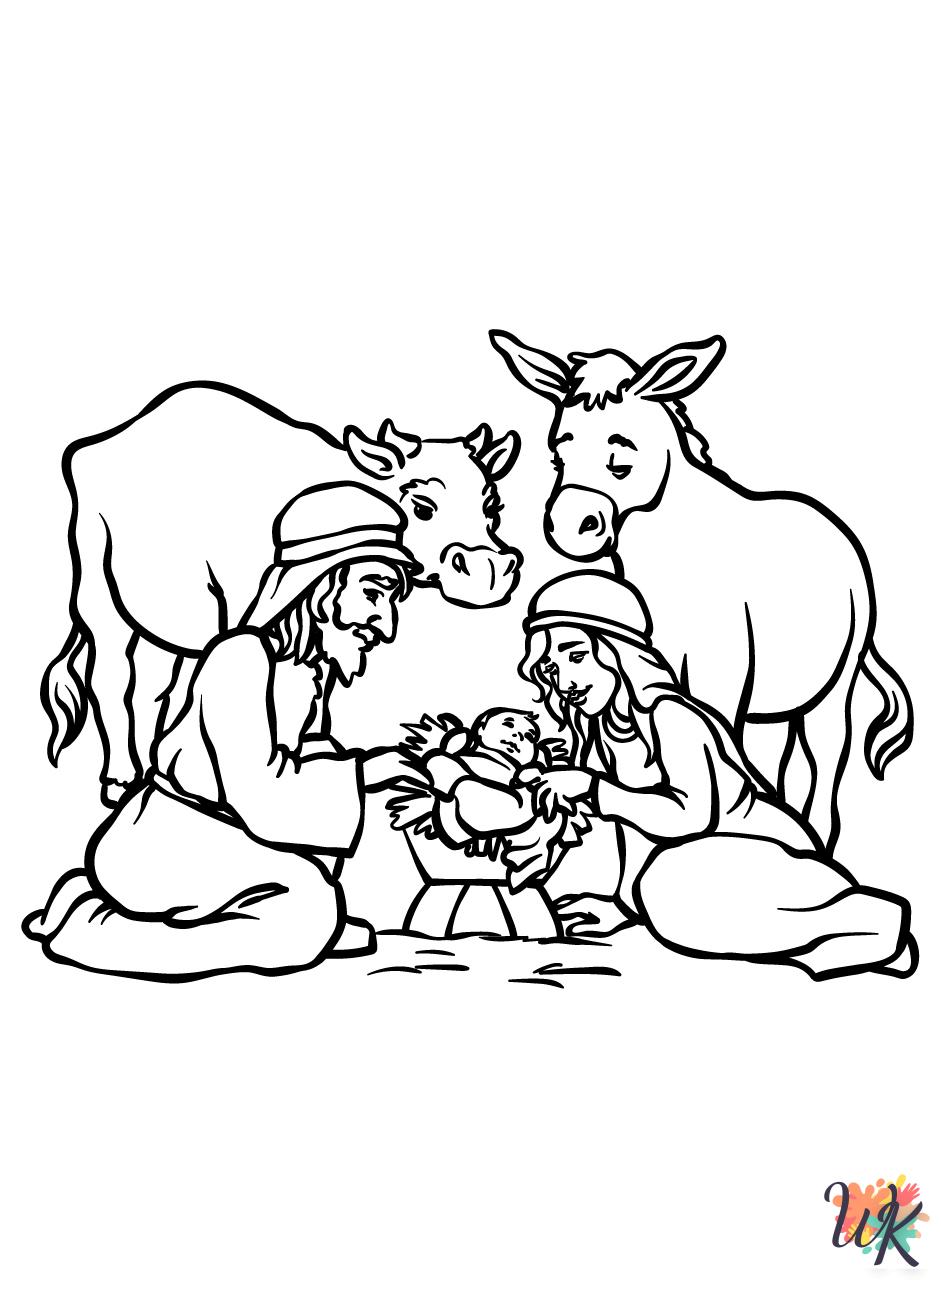 Nativity coloring pages free printable